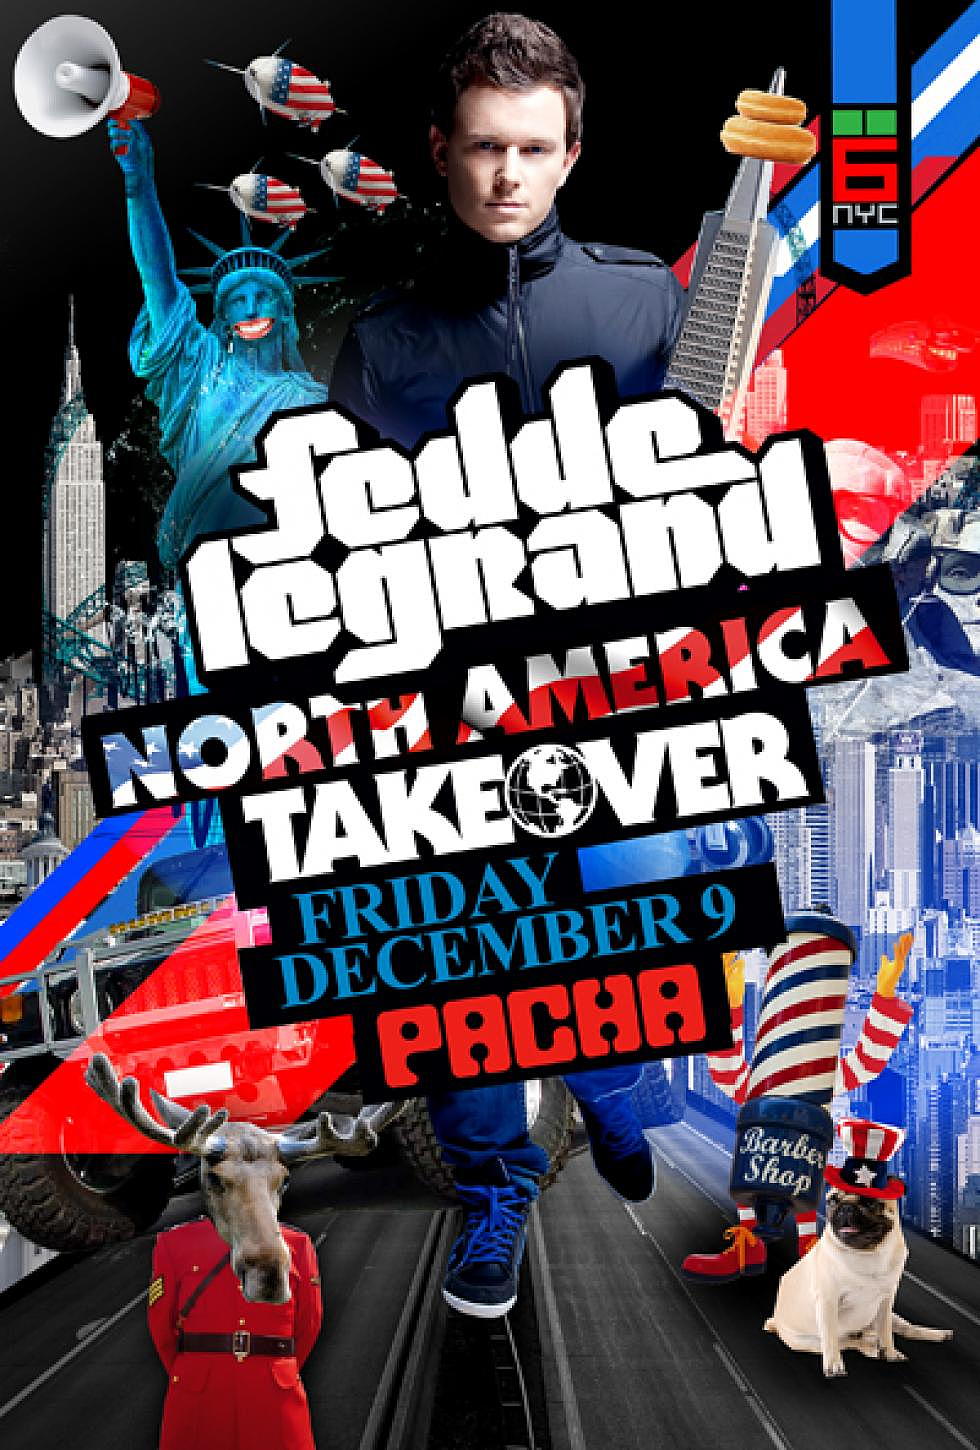 Elektro Presents: Win a chance to meet Fedde Le Grand at Pacha NYC December 9th